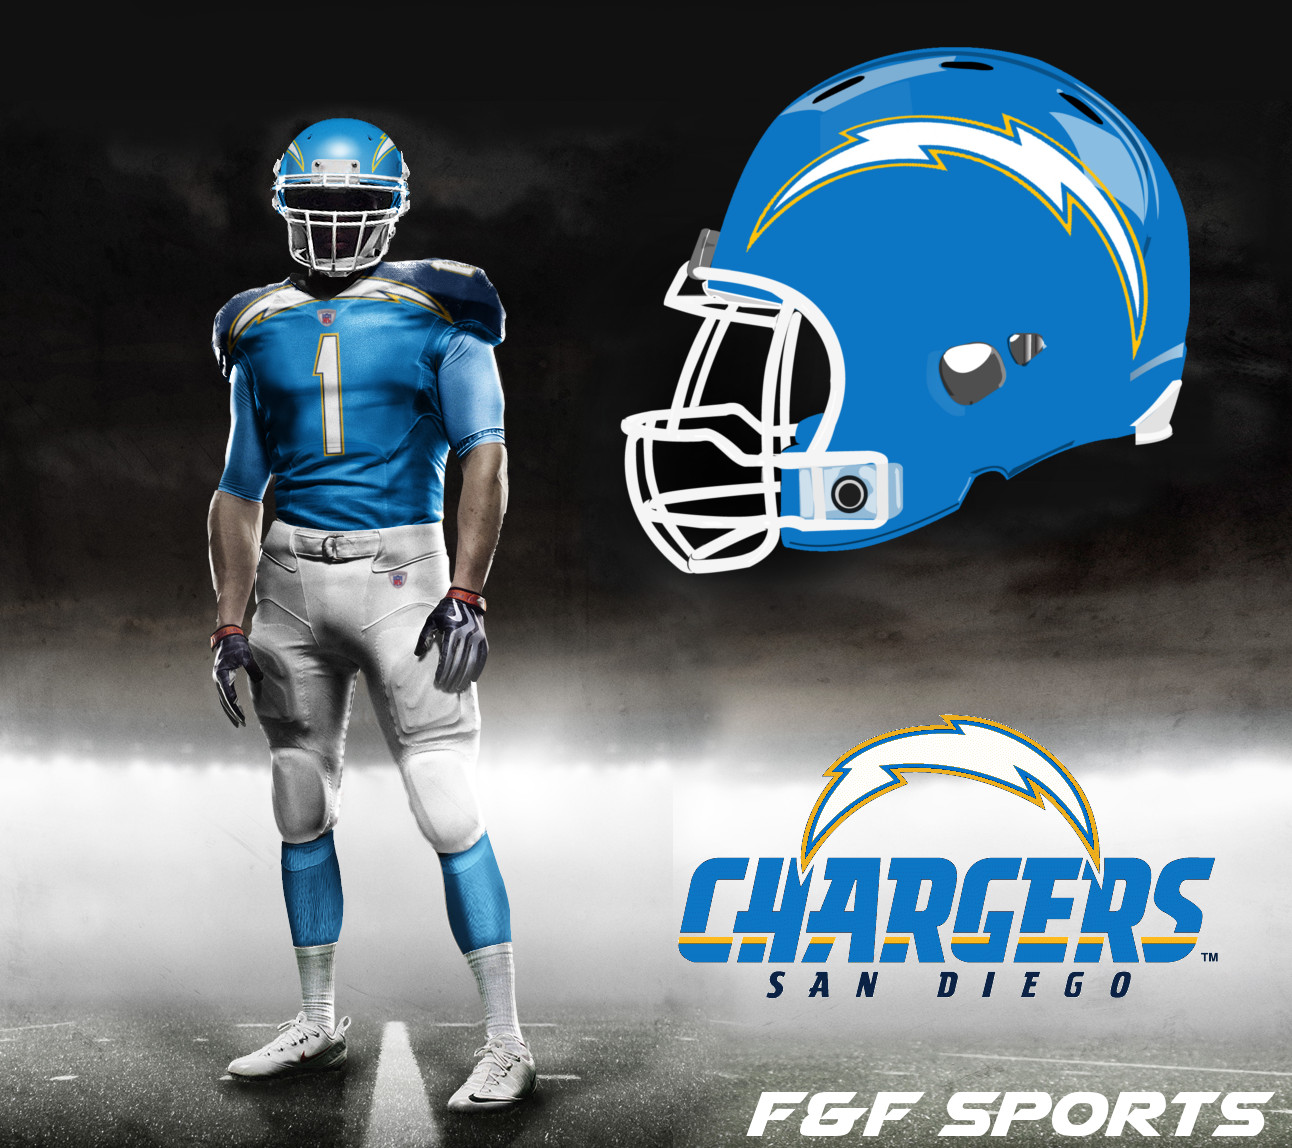 chargers-concept-home.jpg